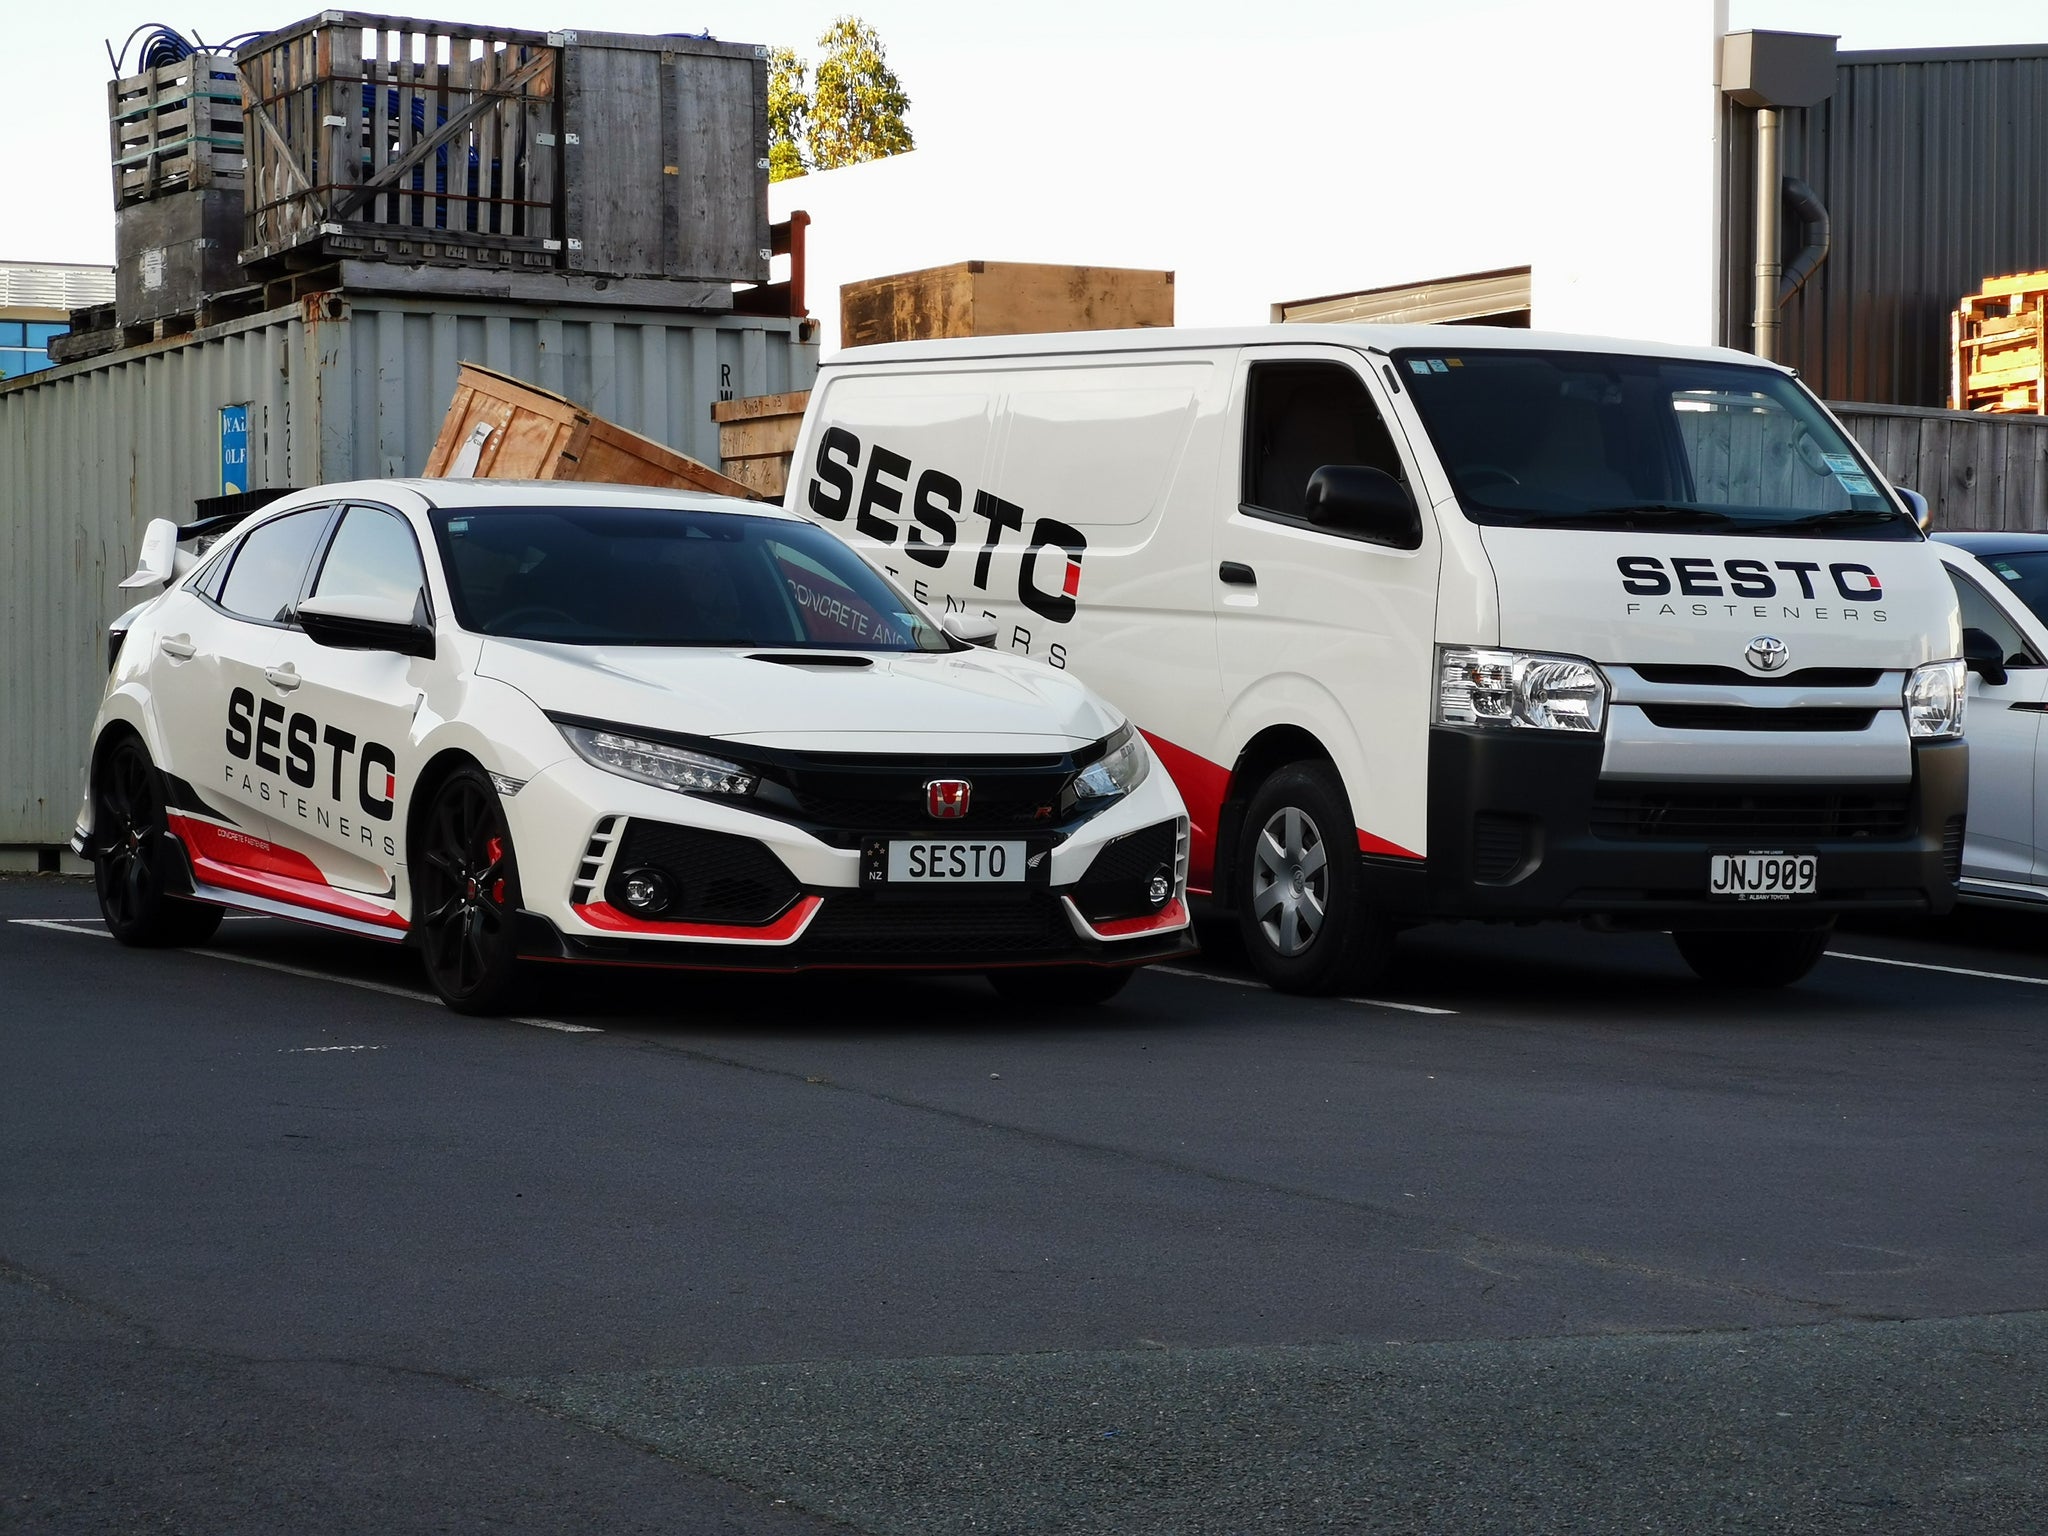 Honda Civic Type R with Sesto Fasteners decals parked front angle view.